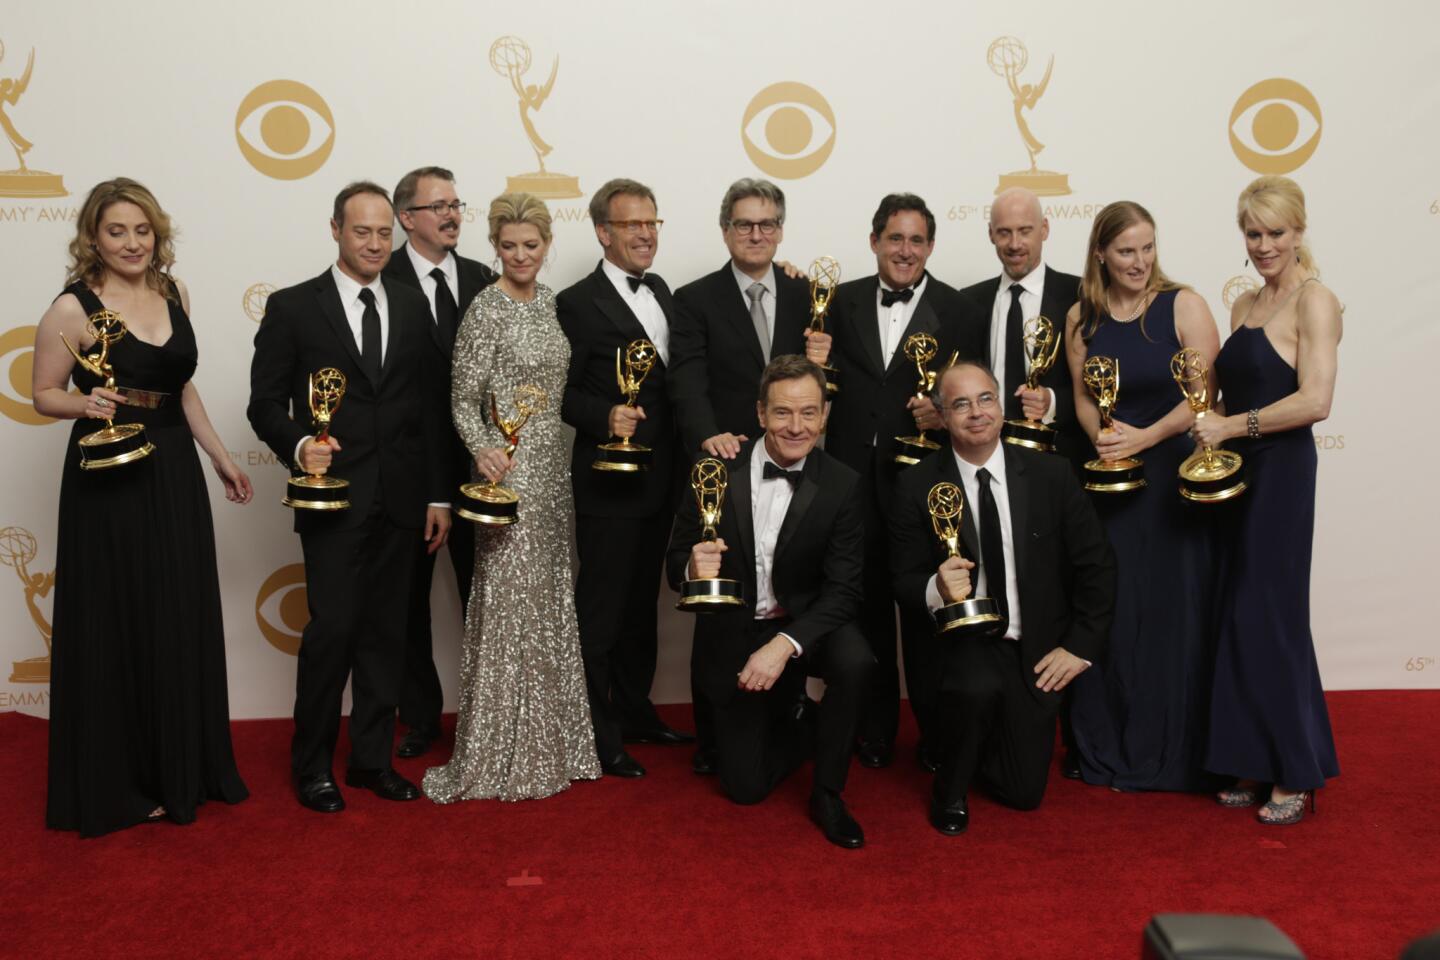 The "Breaking Bad" crew, winner of the drama series Emmy at the 65th Annual Primetime Emmy Awards, pose in the press room.